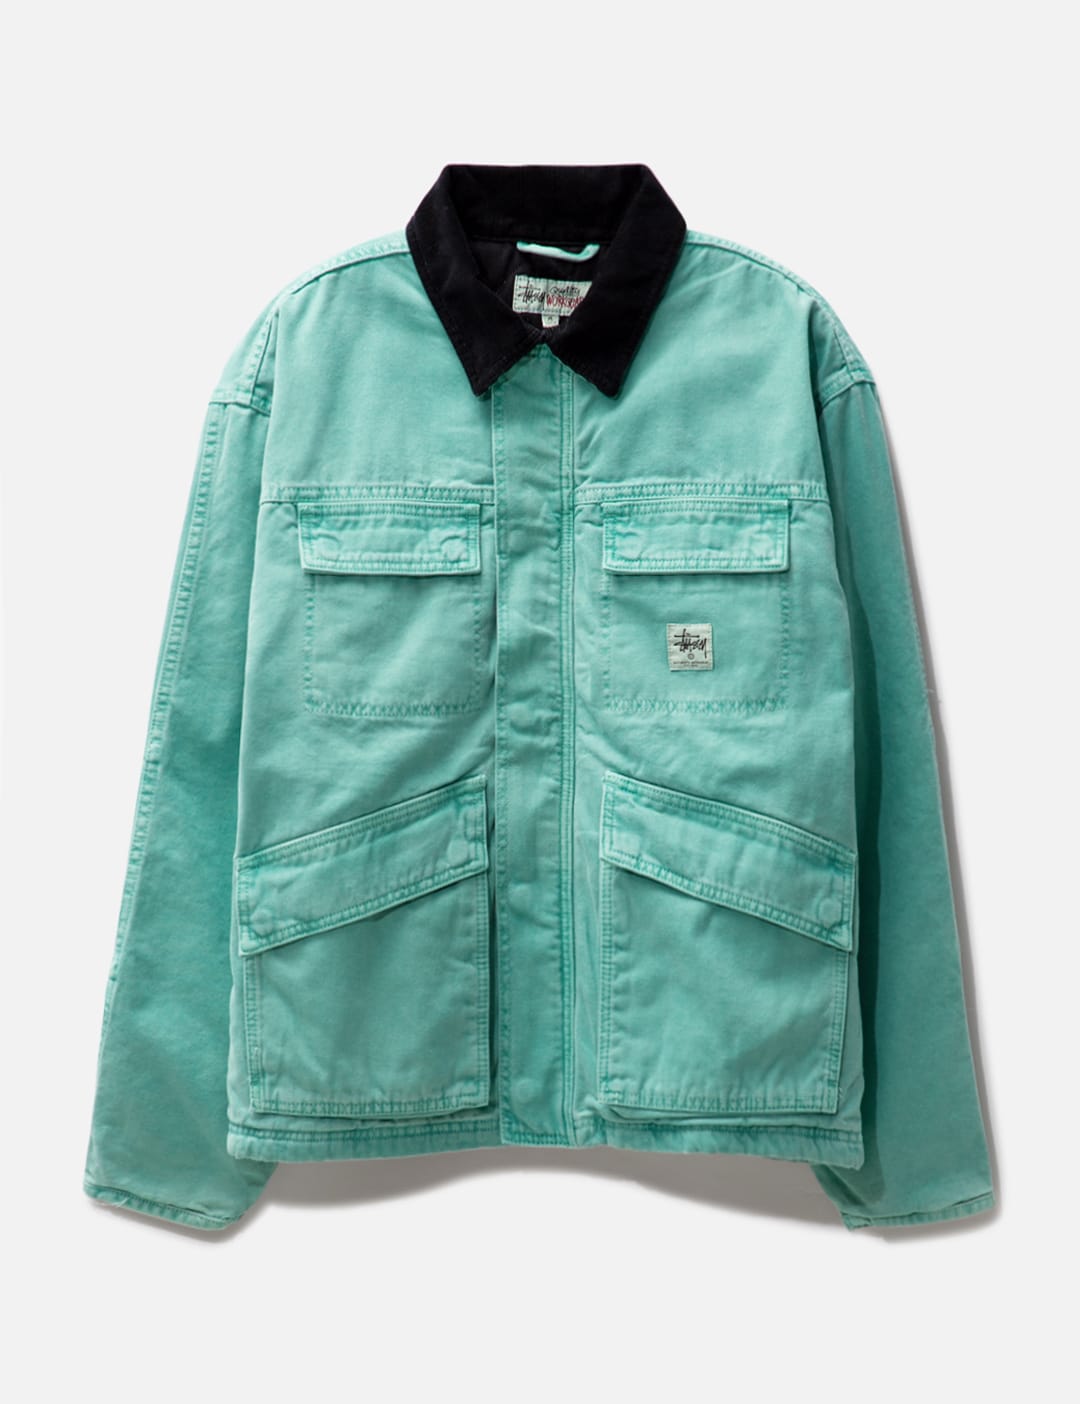 Stüssy - Washed Canvas Shop Jacket | HBX - Globally Curated 